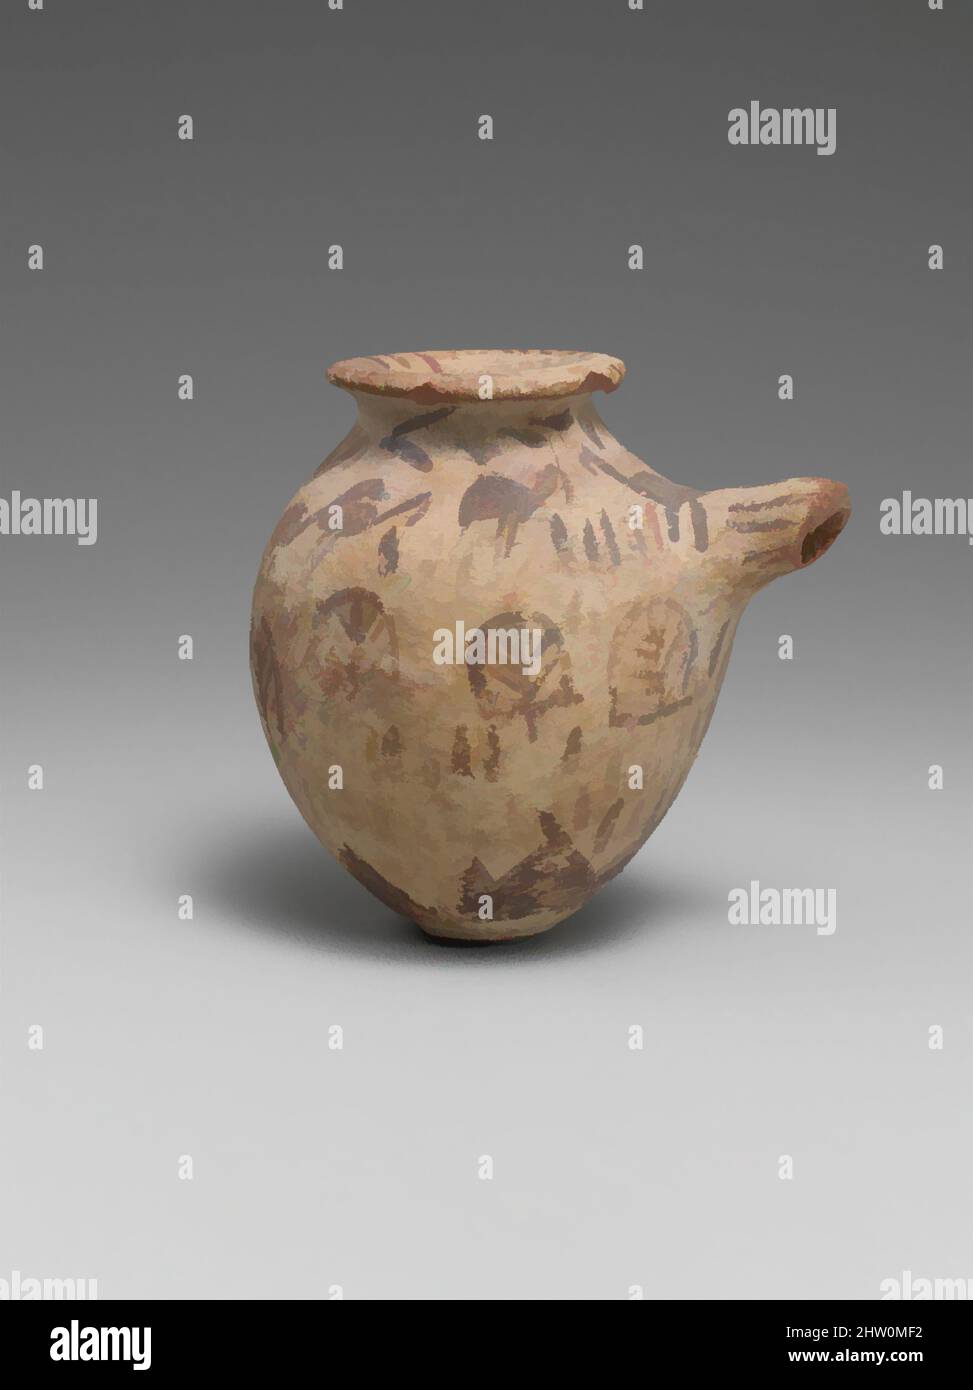 Art inspired by Spouted vessel in decorated ware, Predynastic, Naqada II, ca. 3500 B.C., From Egypt, Pottery, paint, H. 8 × Diam. 8.2 cm (3 1/8 × 3 1/4 in, Classic works modernized by Artotop with a splash of modernity. Shapes, color and value, eye-catching visual impact on art. Emotions through freedom of artworks in a contemporary way. A timeless message pursuing a wildly creative new direction. Artists turning to the digital medium and creating the Artotop NFT Stock Photo